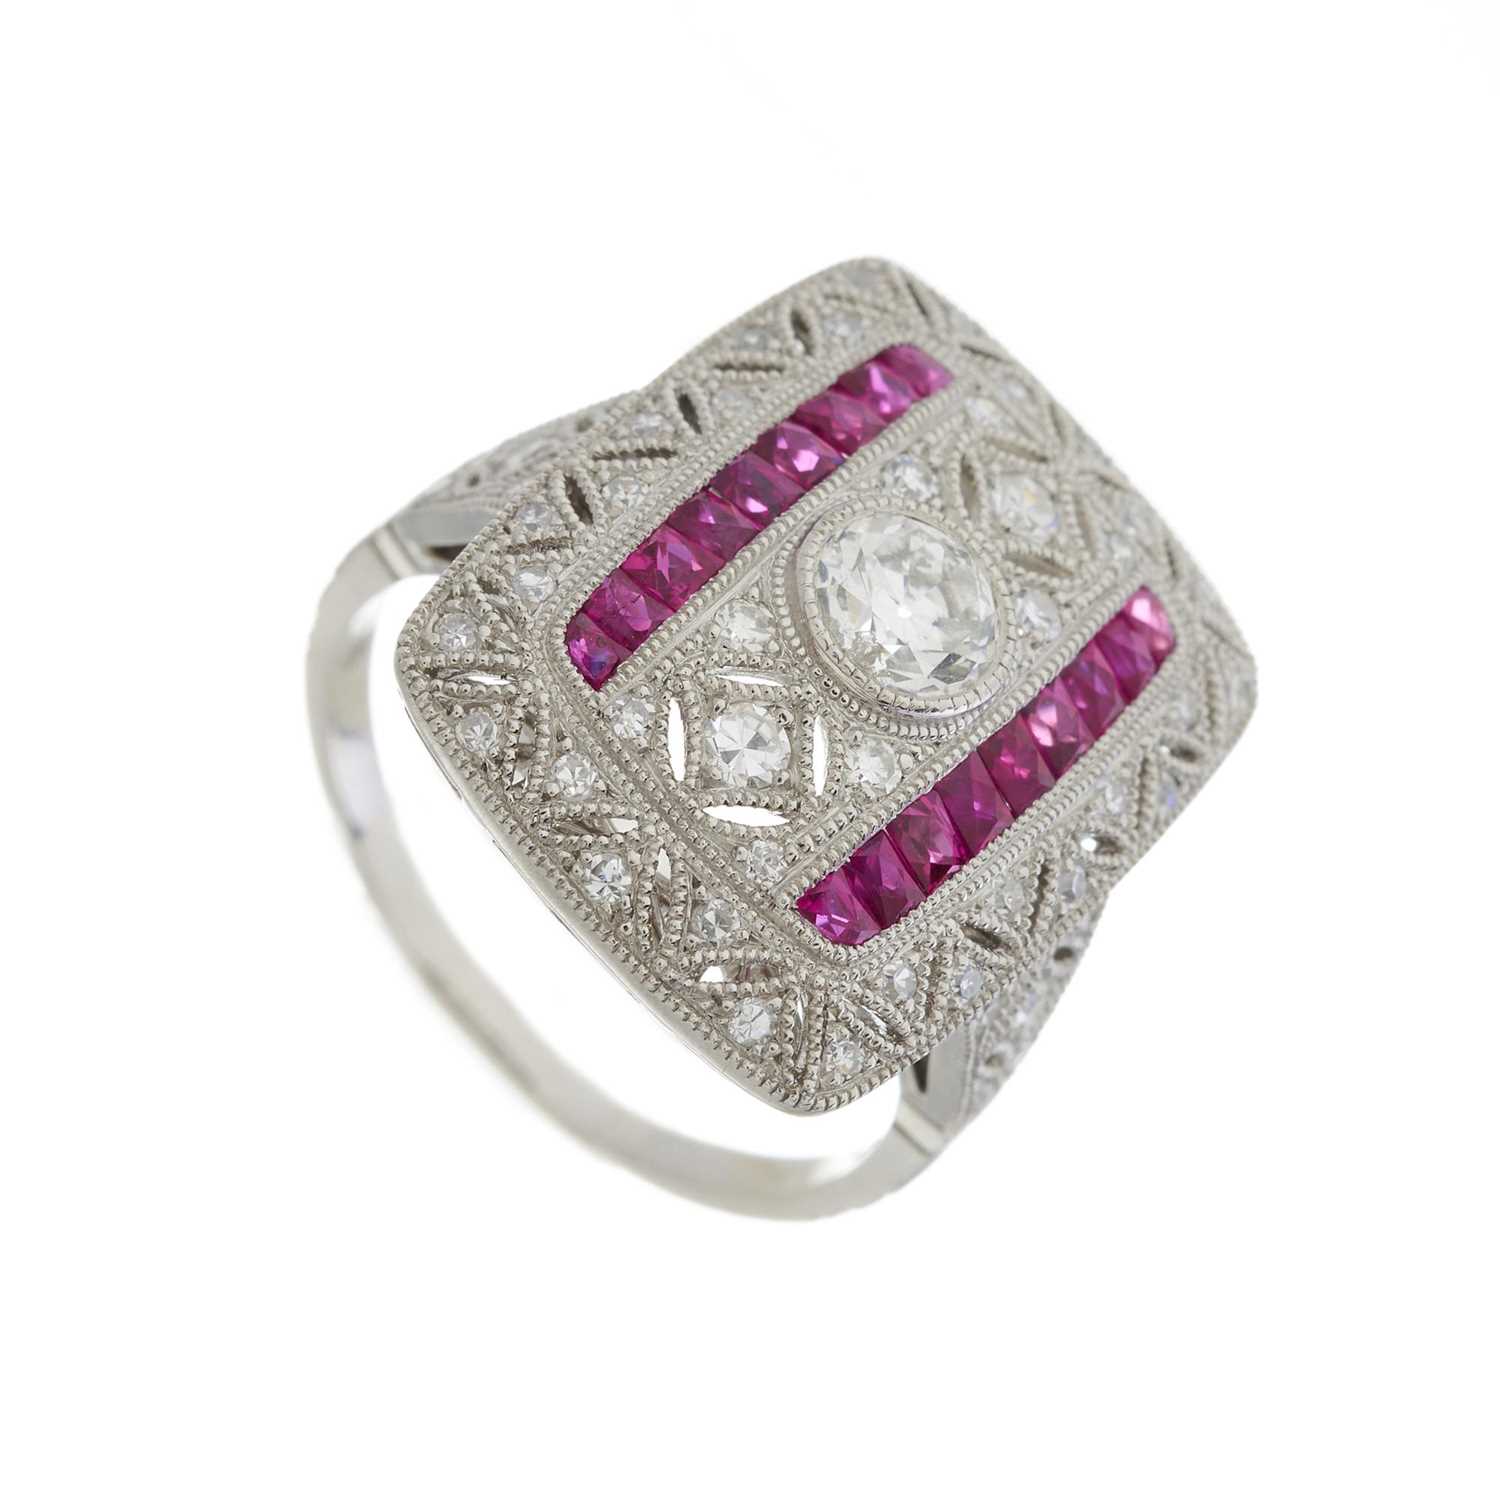 A platinum diamond and ruby openwork dress ring - Image 3 of 3